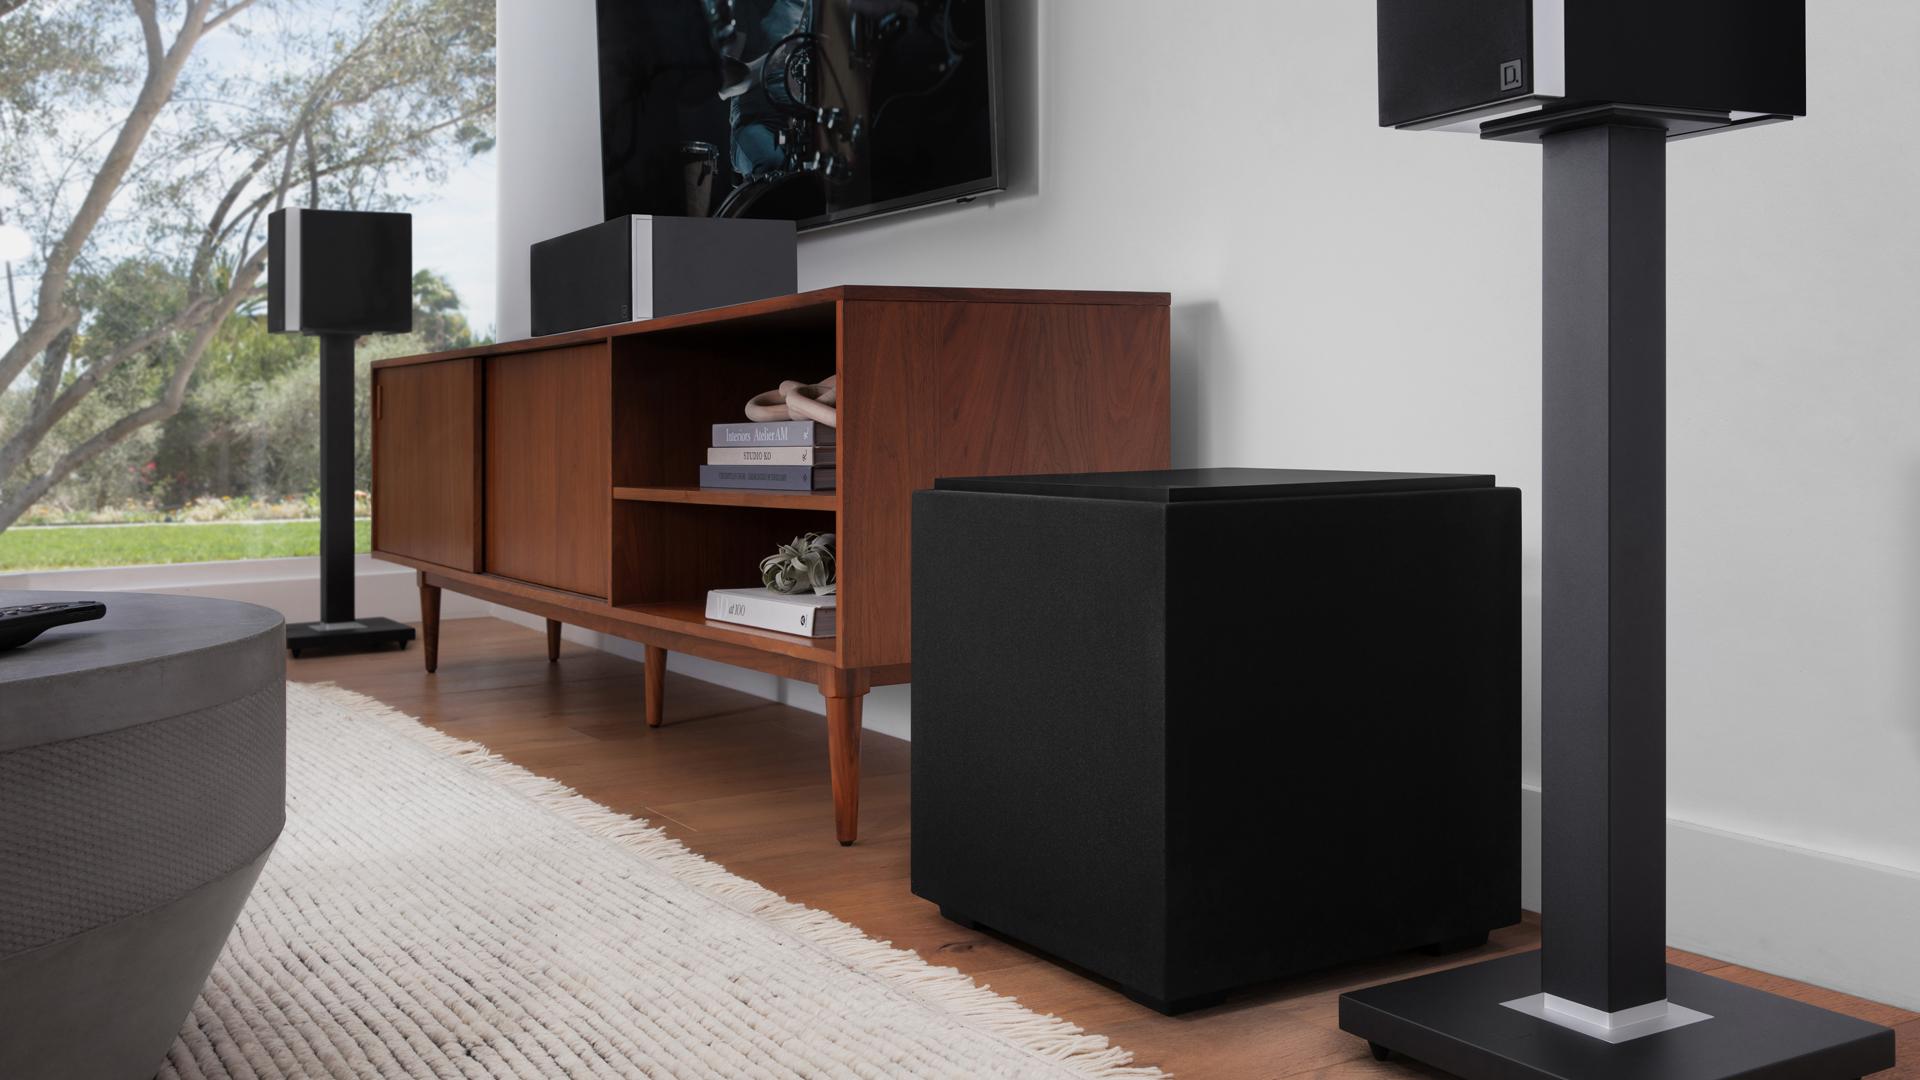 Definitive Technology Descend Reviewed - HomeTheaterReview